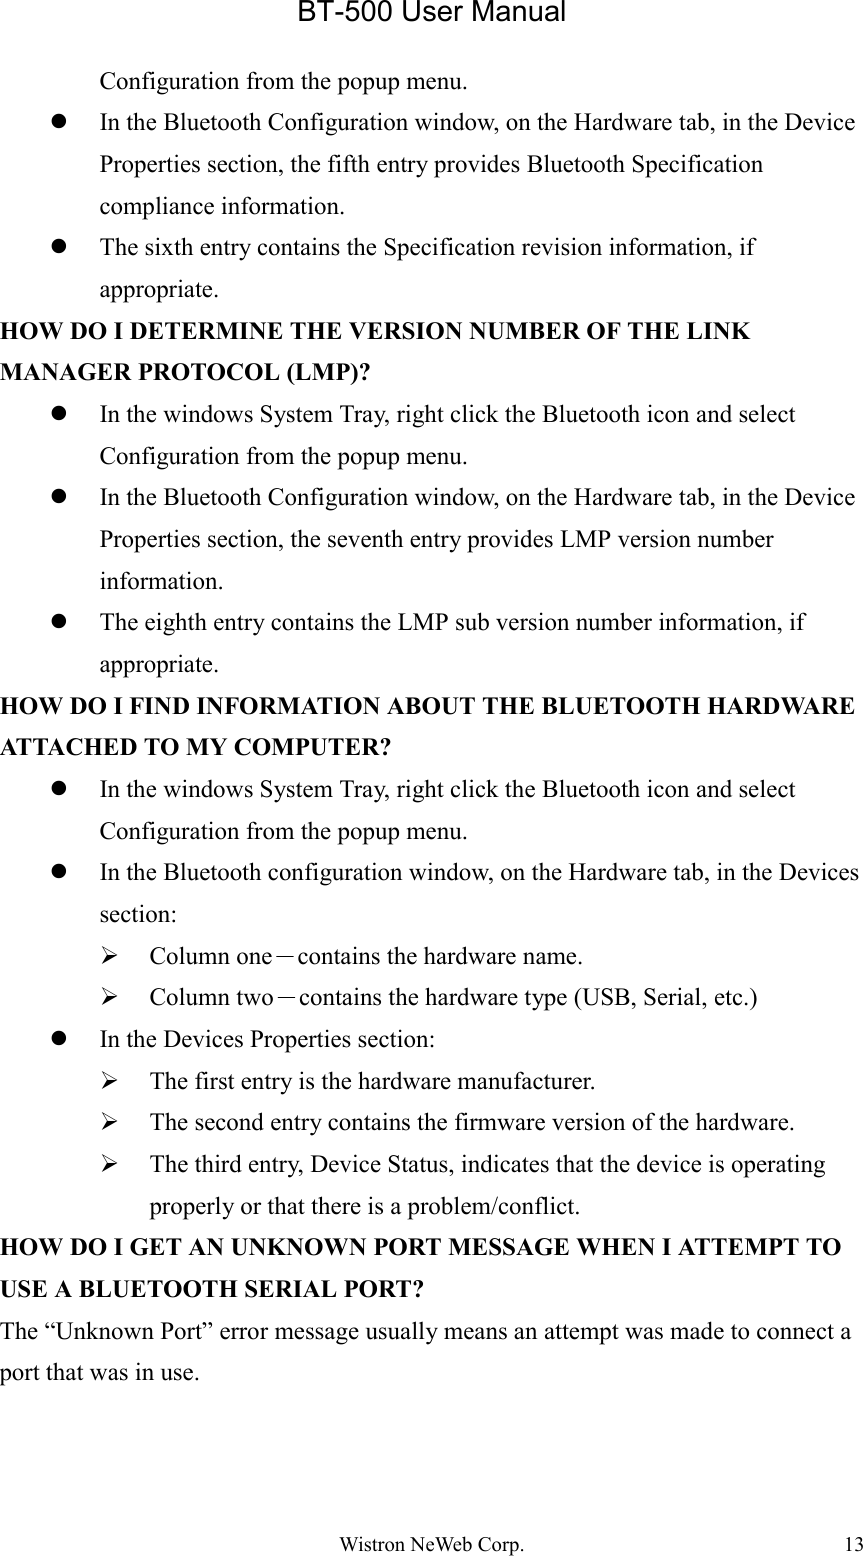 BT-500 User ManualWistron NeWeb Corp. 13Configuration from the popup menu.z In the Bluetooth Configuration window, on the Hardware tab, in the DeviceProperties section, the fifth entry provides Bluetooth Specificationcompliance information.z The sixth entry contains the Specification revision information, ifappropriate.HOW DO I DETERMINE THE VERSION NUMBER OF THE LINKMANAGER PROTOCOL (LMP)?z In the windows System Tray, right click the Bluetooth icon and selectConfiguration from the popup menu.z In the Bluetooth Configuration window, on the Hardware tab, in the DeviceProperties section, the seventh entry provides LMP version numberinformation.z The eighth entry contains the LMP sub version number information, ifappropriate.HOW DO I FIND INFORMATION ABOUT THE BLUETOOTH HARDWAREATTACHED TO MY COMPUTER?z In the windows System Tray, right click the Bluetooth icon and selectConfiguration from the popup menu.z In the Bluetooth configuration window, on the Hardware tab, in the Devicessection:¾ Column one－contains the hardware name.¾ Column two－contains the hardware type (USB, Serial, etc.)z In the Devices Properties section:¾ The first entry is the hardware manufacturer.¾ The second entry contains the firmware version of the hardware.¾ The third entry, Device Status, indicates that the device is operatingproperly or that there is a problem/conflict.HOW DO I GET AN UNKNOWN PORT MESSAGE WHEN I ATTEMPT TOUSE A BLUETOOTH SERIAL PORT?The “Unknown Port” error message usually means an attempt was made to connect aport that was in use.